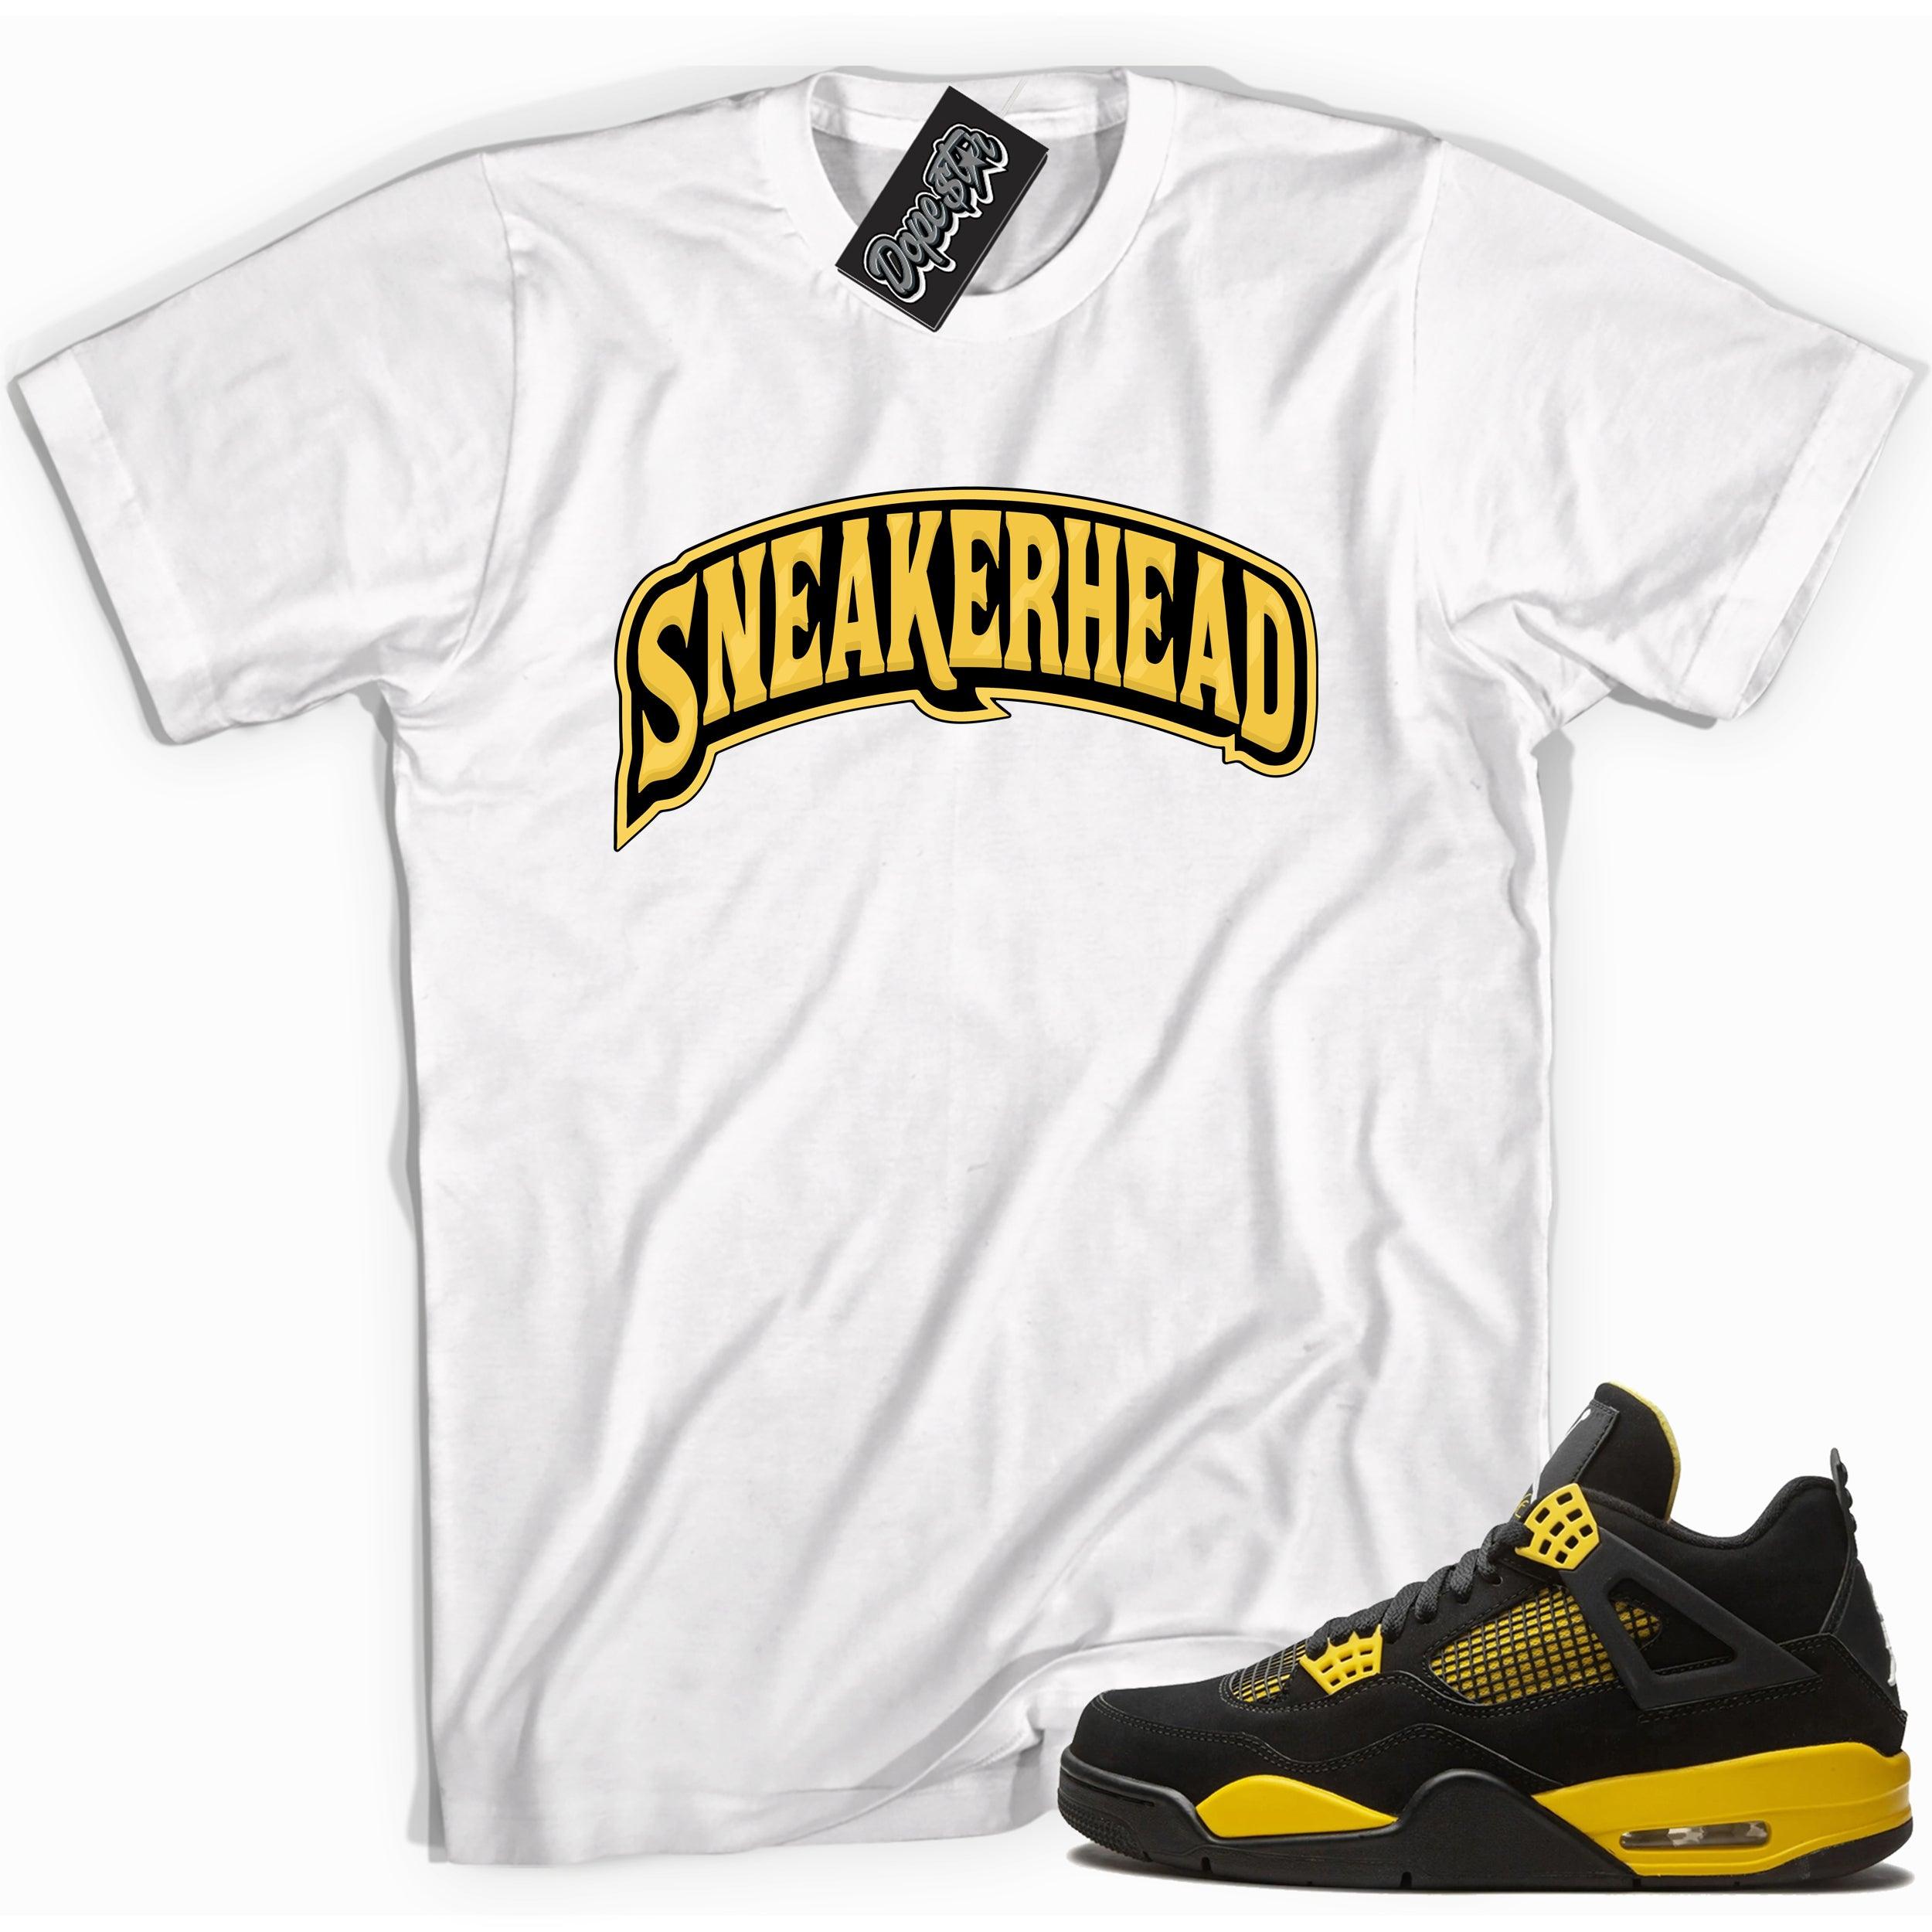 Cool white  graphic tee with 'sneakerhead' print, that perfectly matches Air Jordan 4 Thunder sneakers